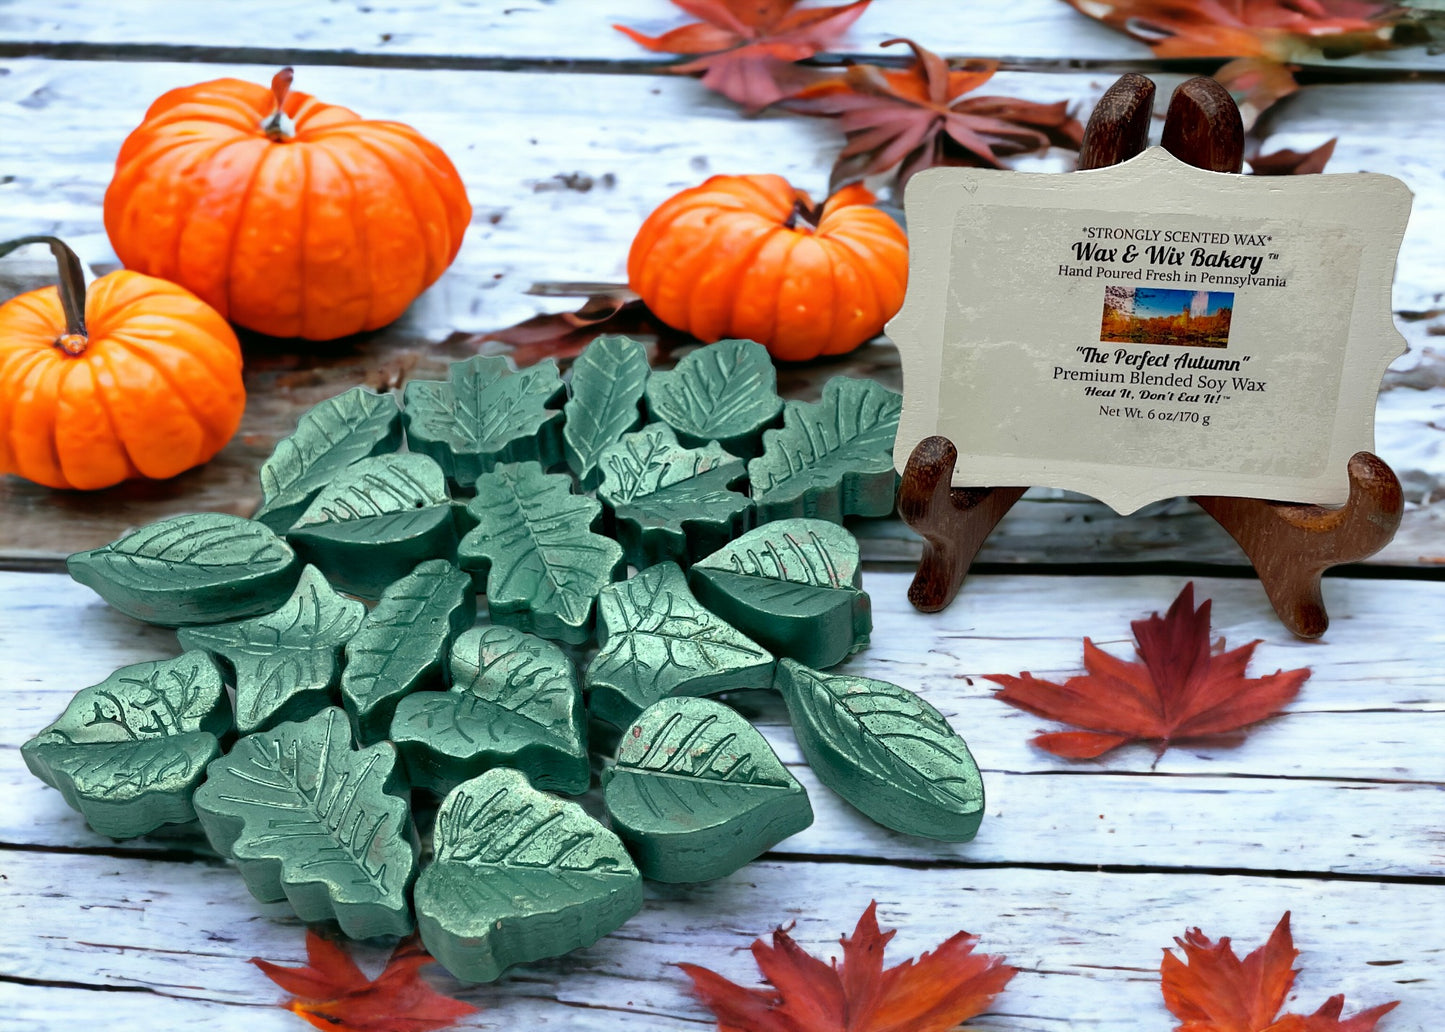 Leaves Wax Melts. The Perfect Autumn. 6 Oz. Soy Wax Melts/Leaf Shaped/Strongly Scented Wax Melts/Wax Tarts for Wax Warmers/Fall Wax Melts